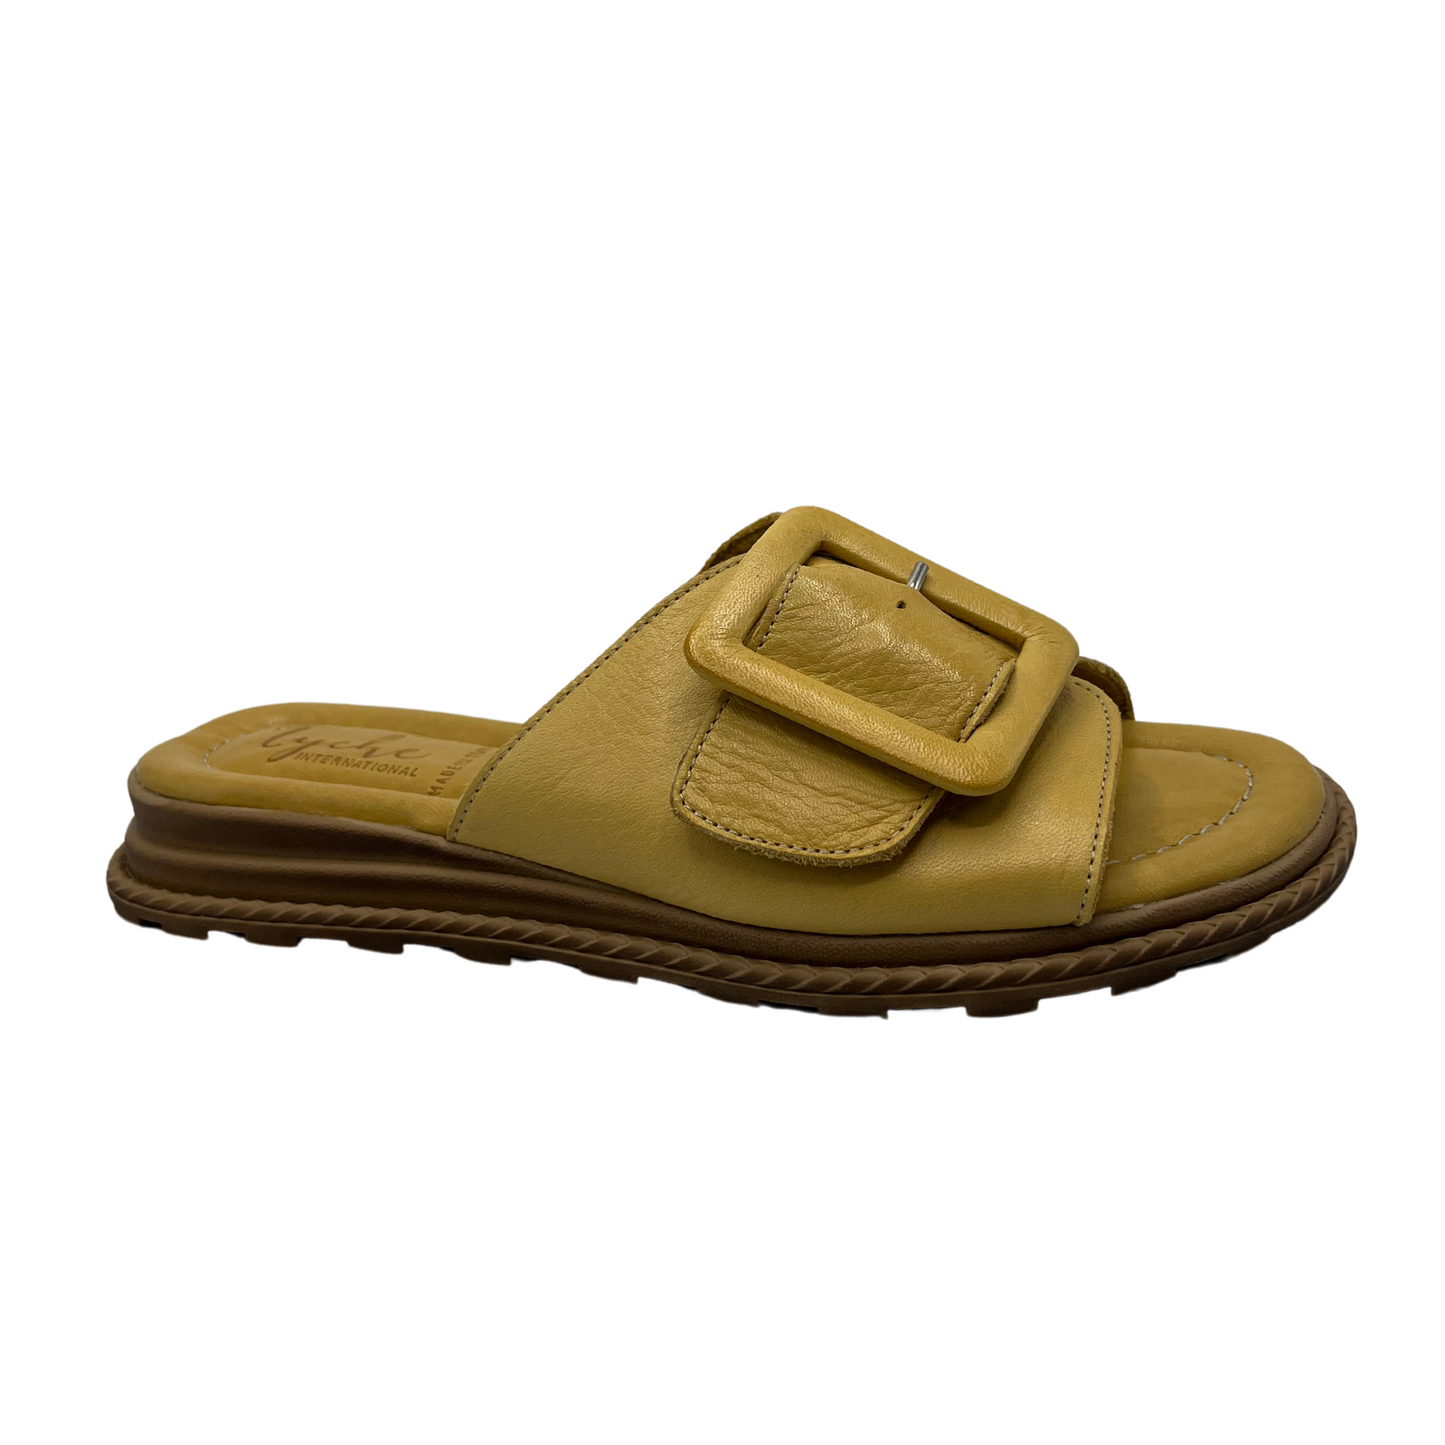 Angled view of yellow leather sandal with oversized buckle on strap. Leather lined, cushioned footbed and open toe